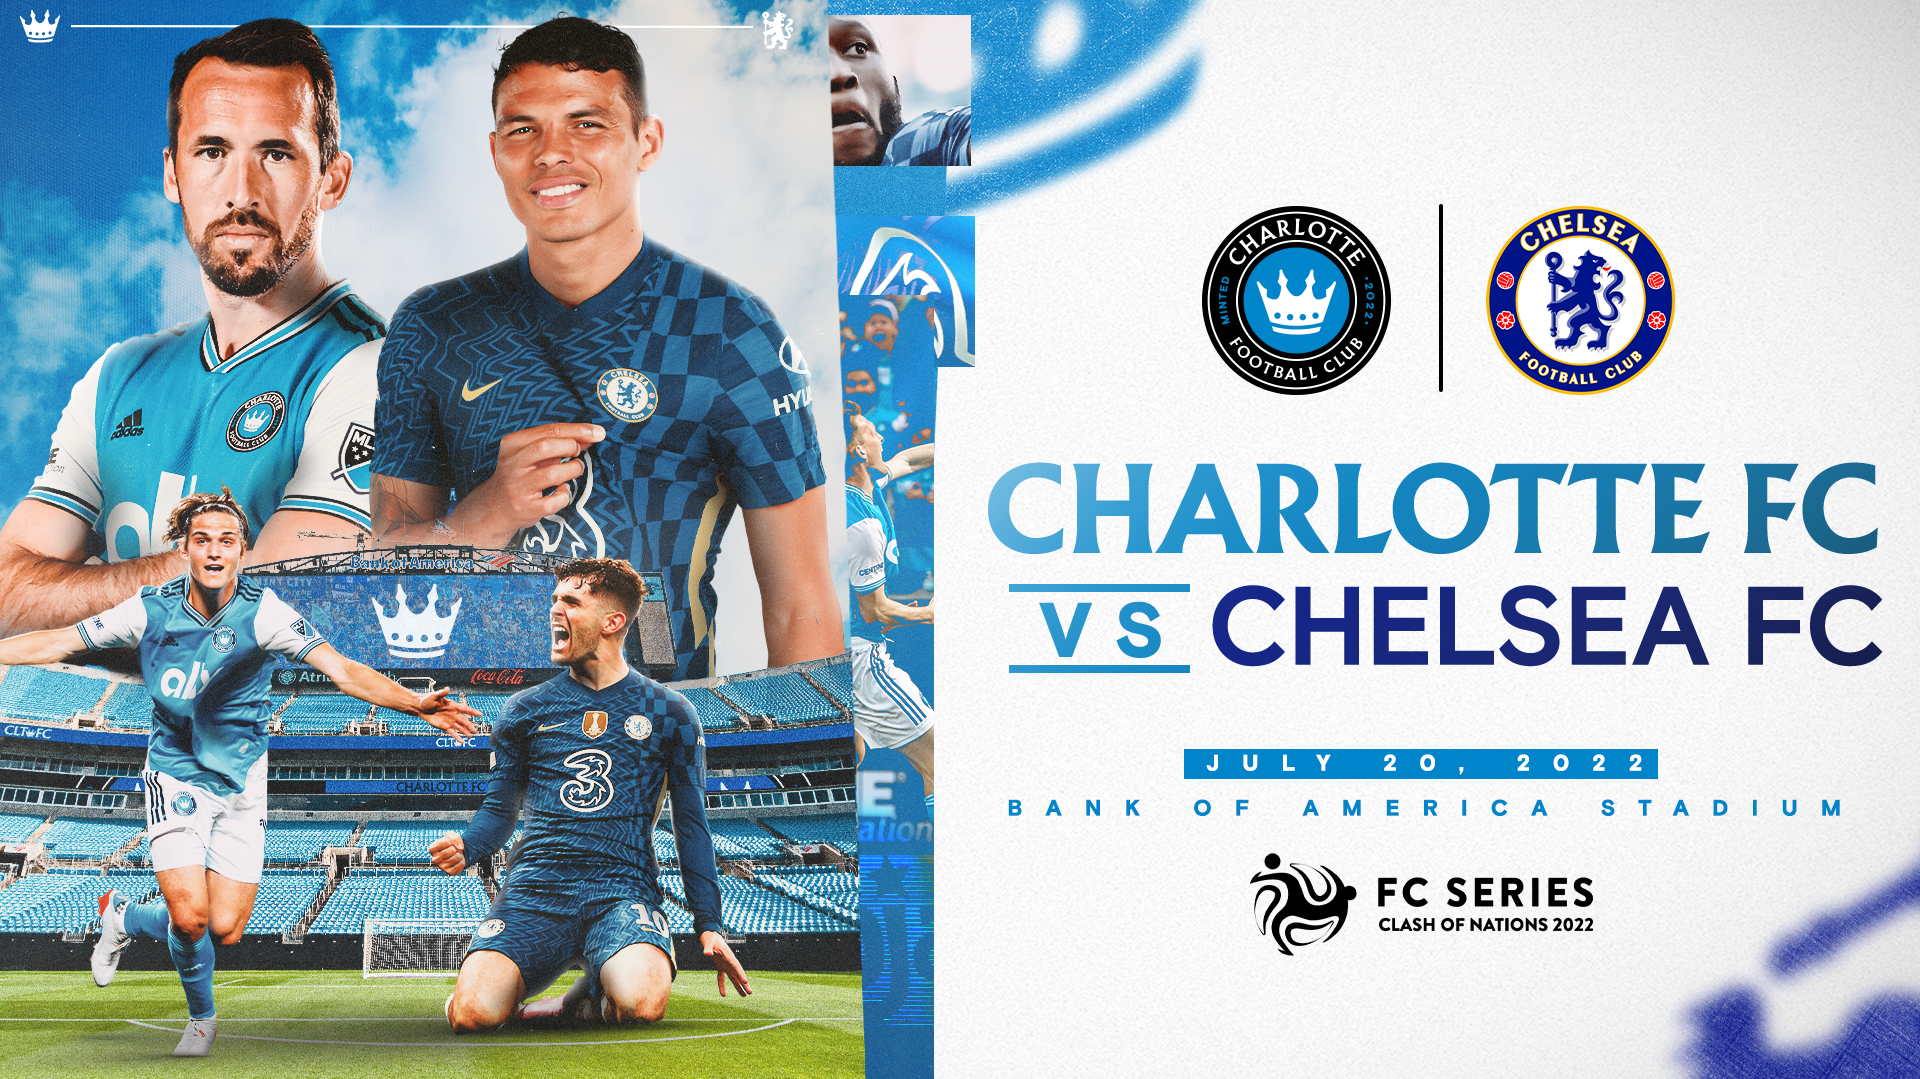 Charlotte FC to Host Chelsea FC at Bank of America Stadium on July